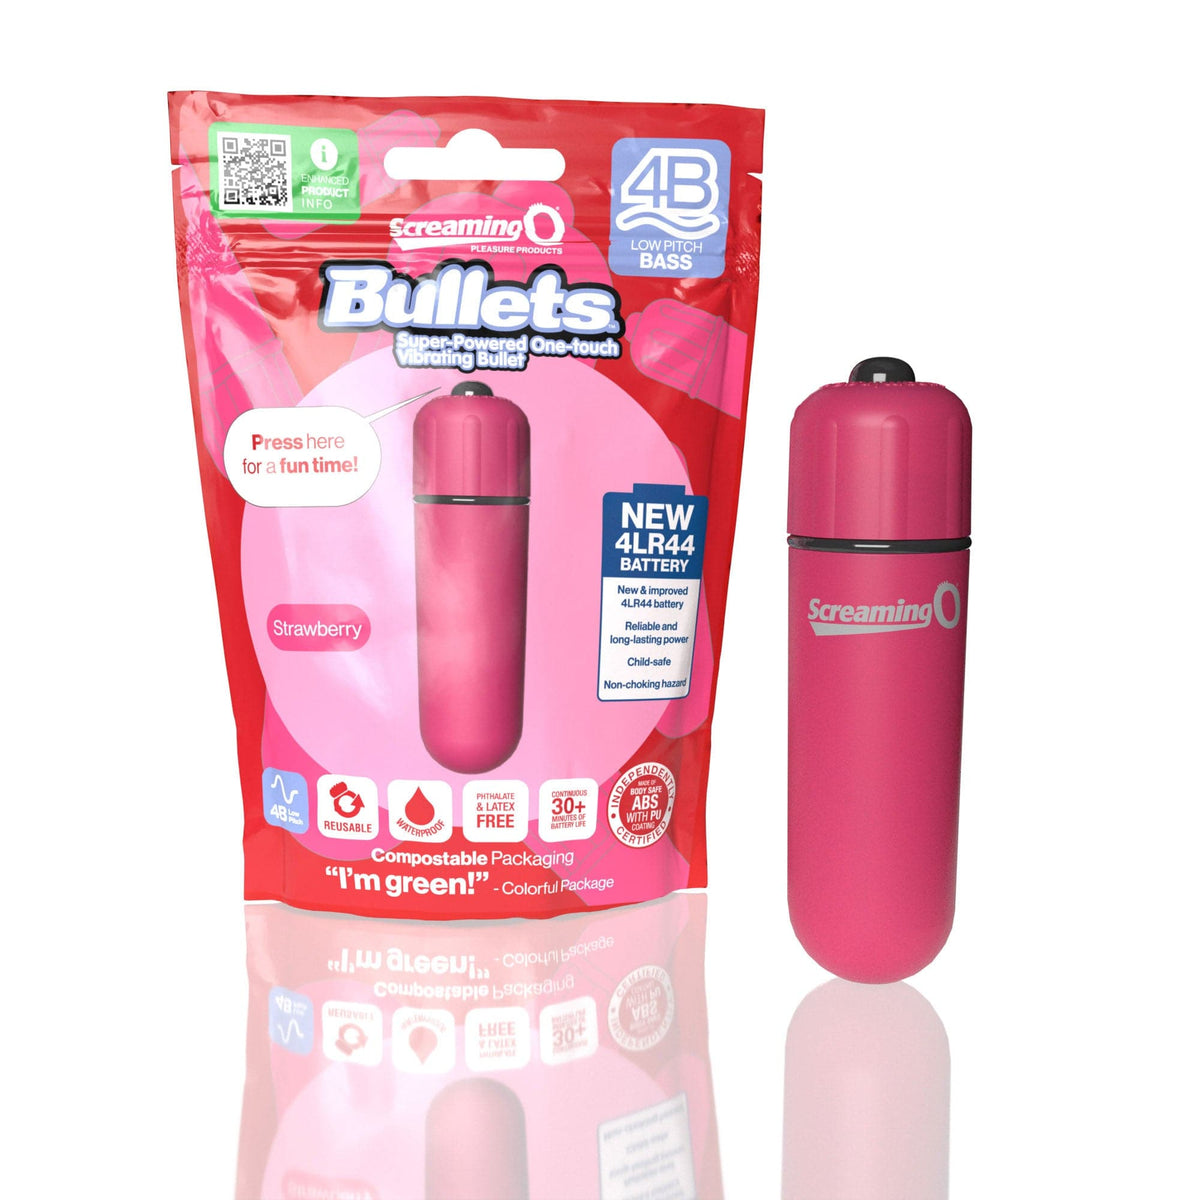 screaming o 4b bullet super powered one touch vibrating bullet strawberry